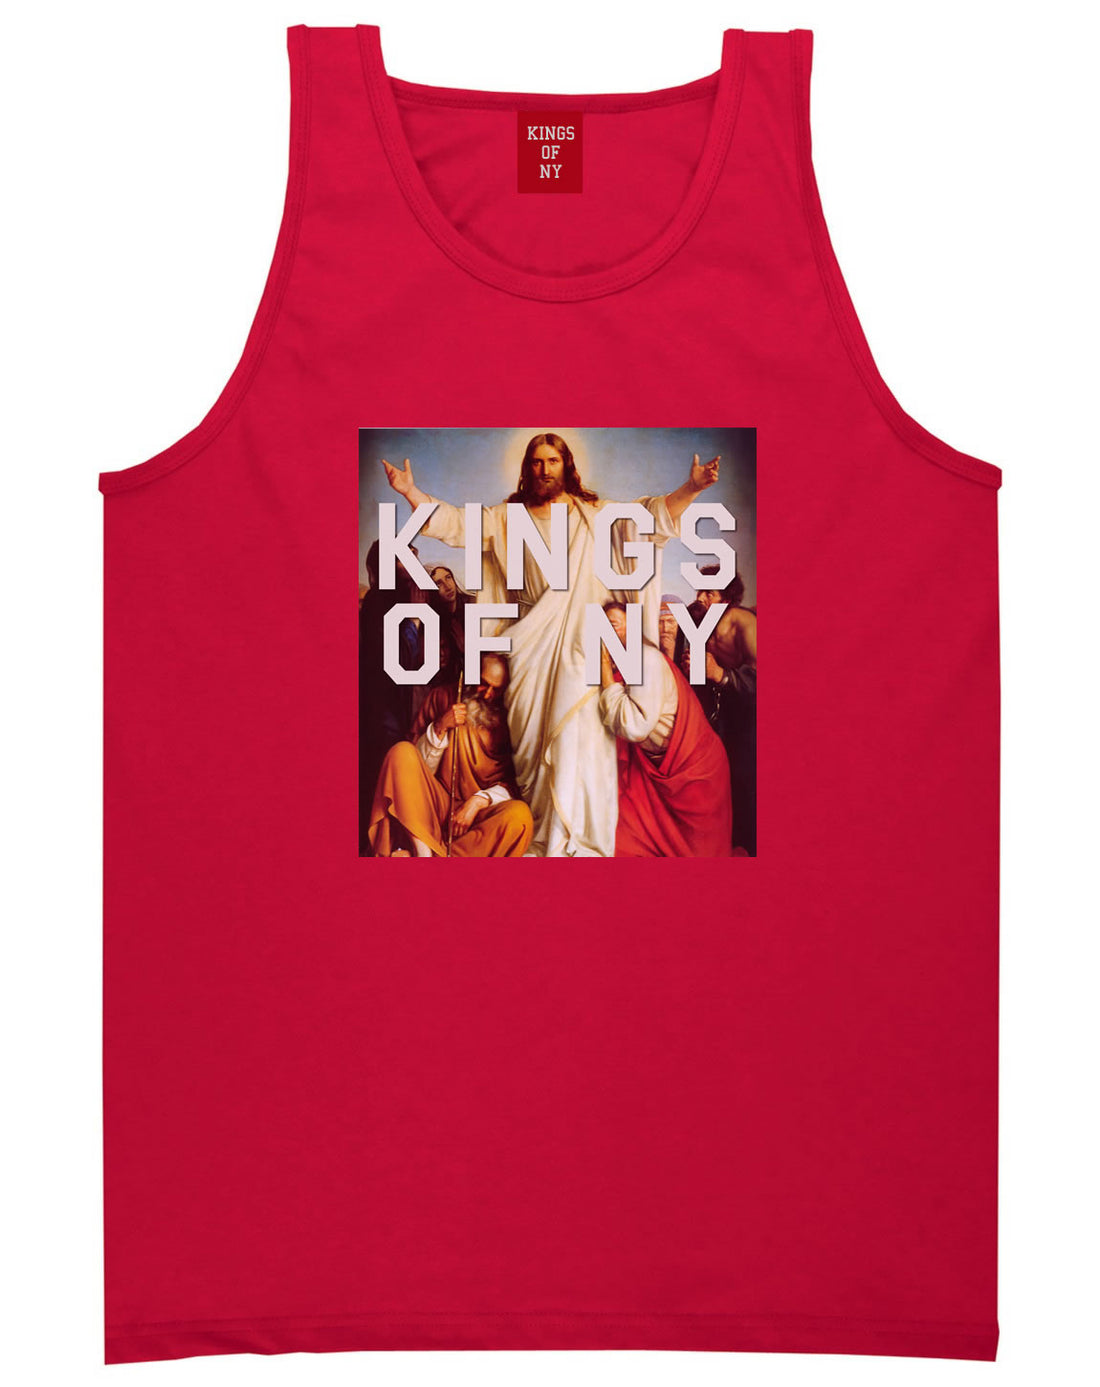 Jesus Worship and Praise of Power Tank Top in Red By Kings Of NY